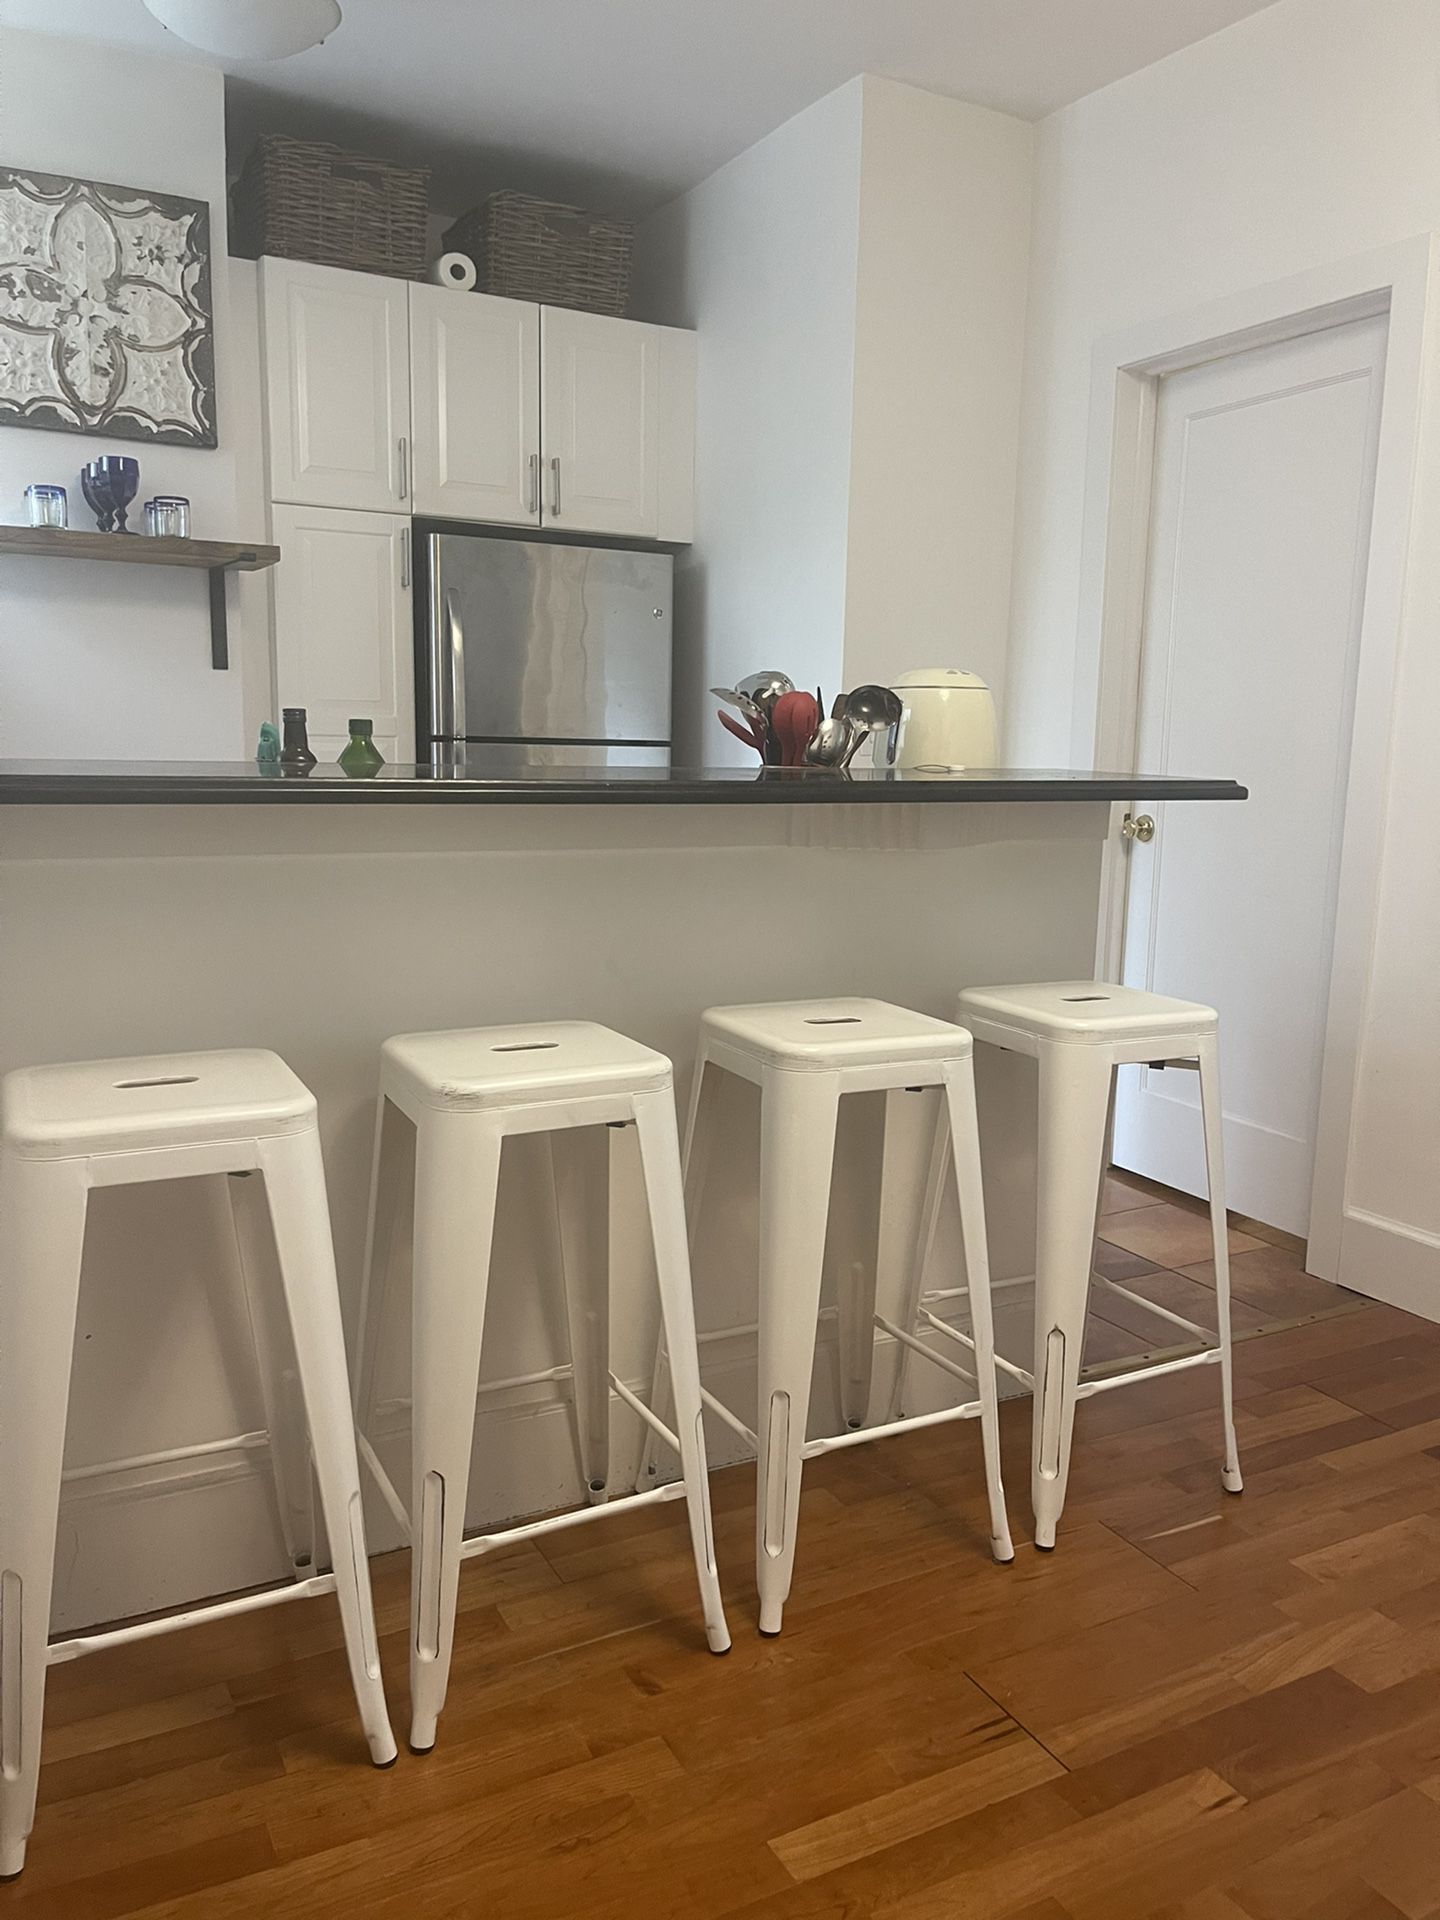 Must Go: Set Of 4 Stools For Bar/Counter